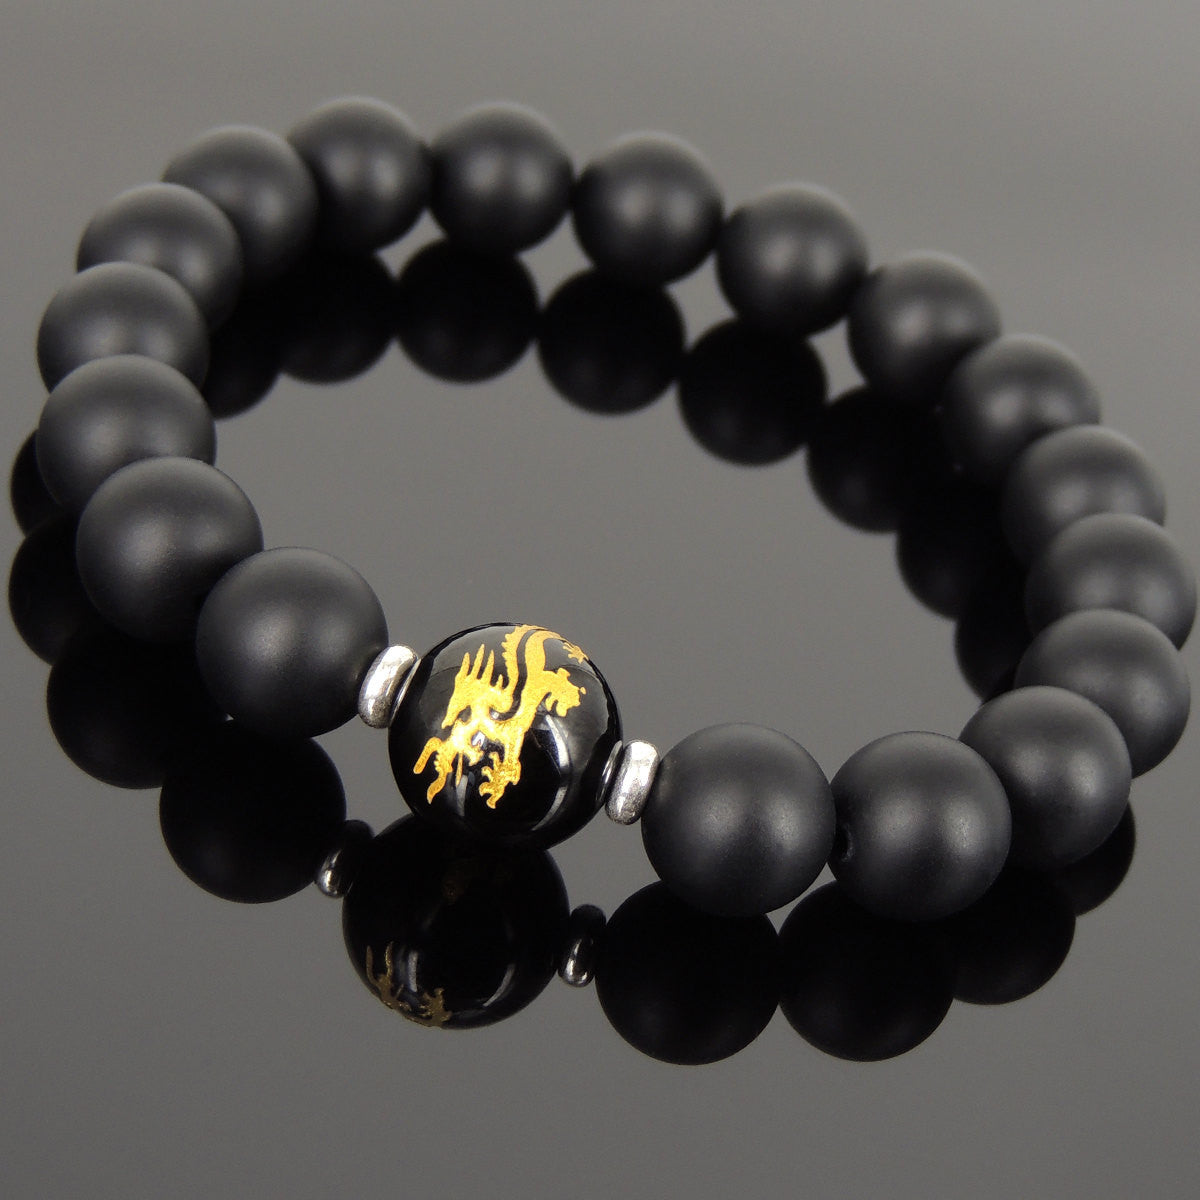 Black Onyx Healing Gemstone Bracelet with Gold Hot Stamped Dragon & Cloud & S925 Sterling Silver Spacers - Handmade by Gem & Silver BR1027